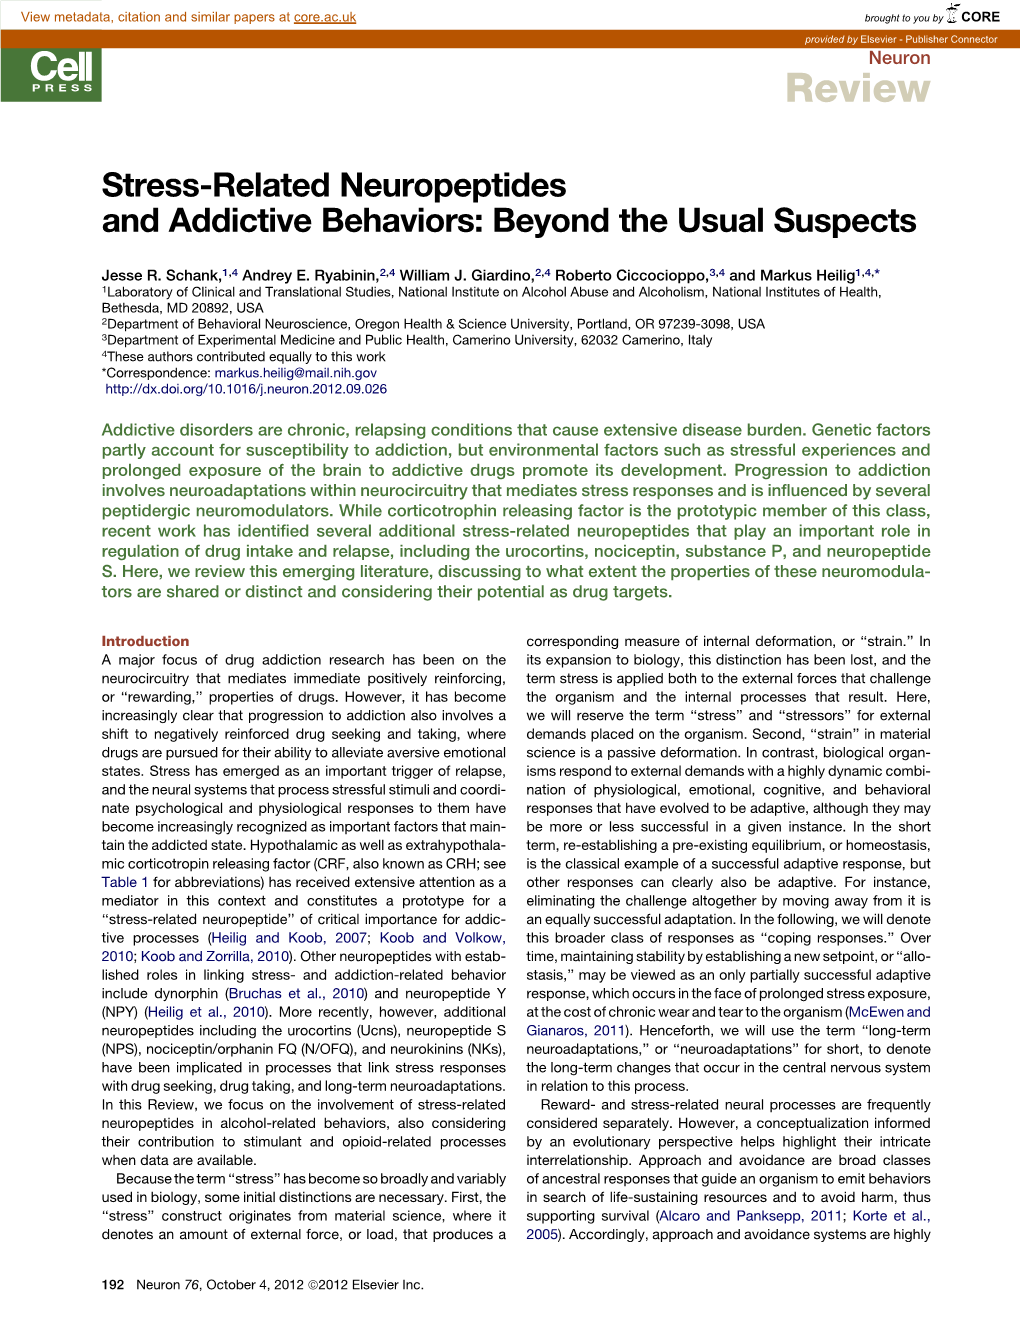 Stress-Related Neuropeptides and Addictive Behaviors: Beyond the Usual Suspects